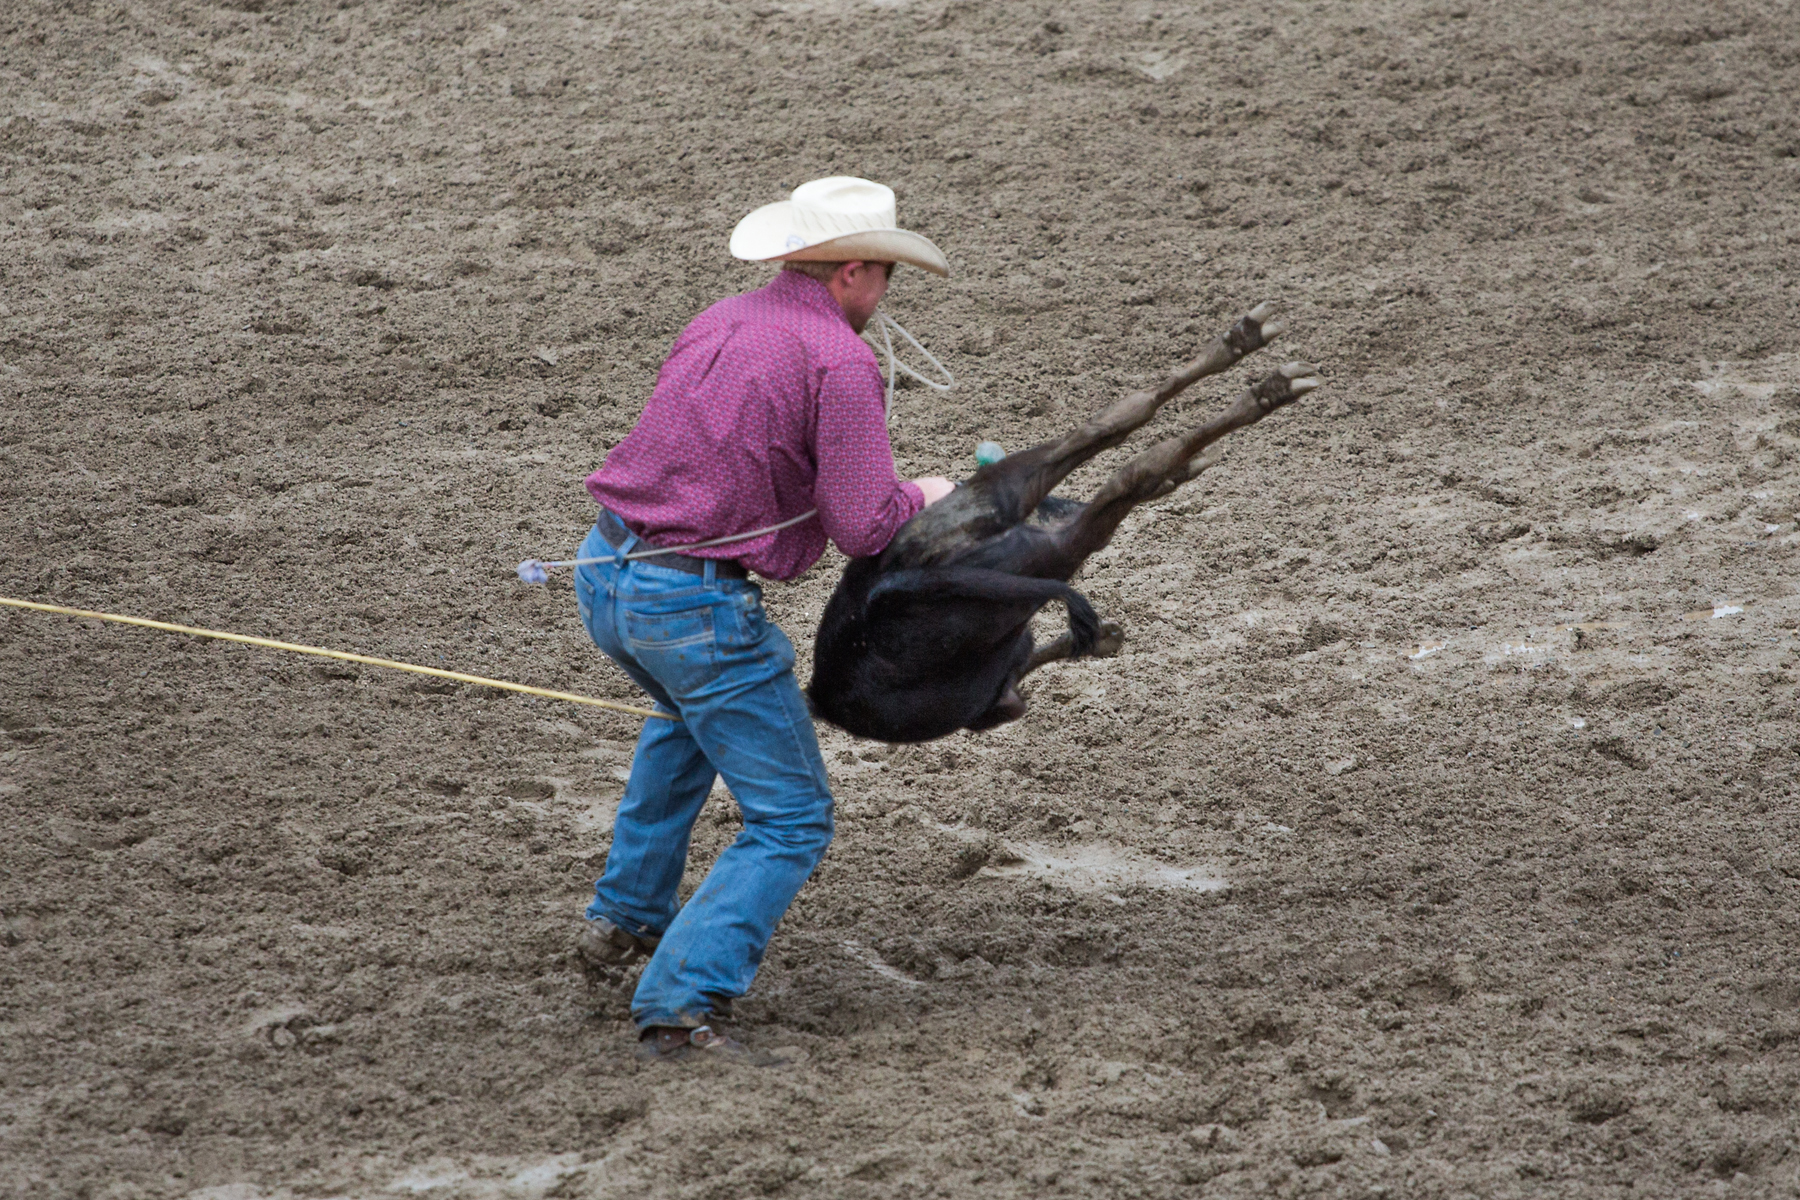 Calf roping at Home of Champions Rodeo, Red Lodge, MT.  Click for next photo.